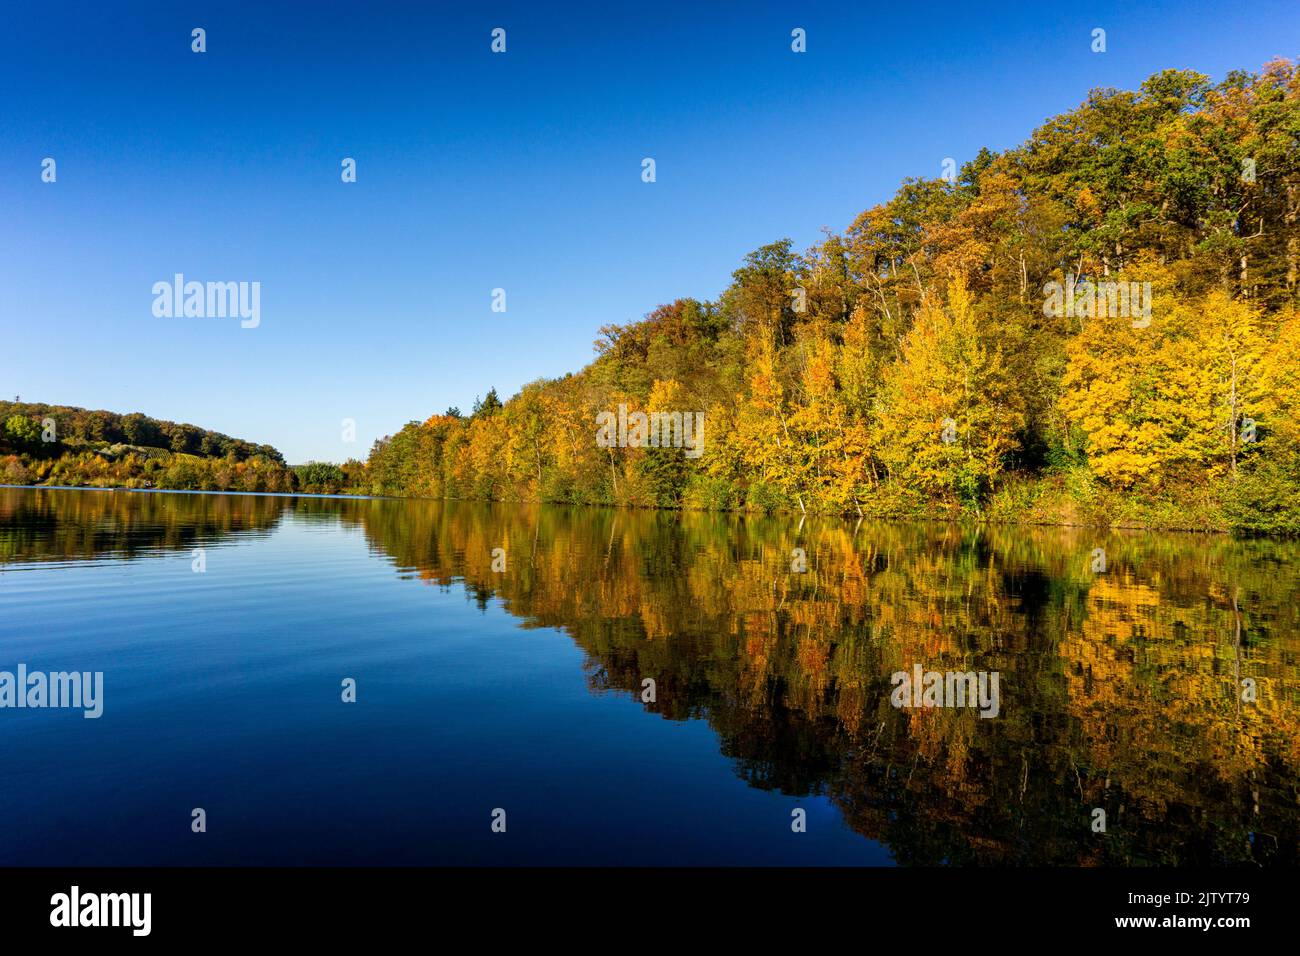 A beautiful scene of colorful trees reflecting on Michelbach See in Zaberfeld, Germany Stock Photo